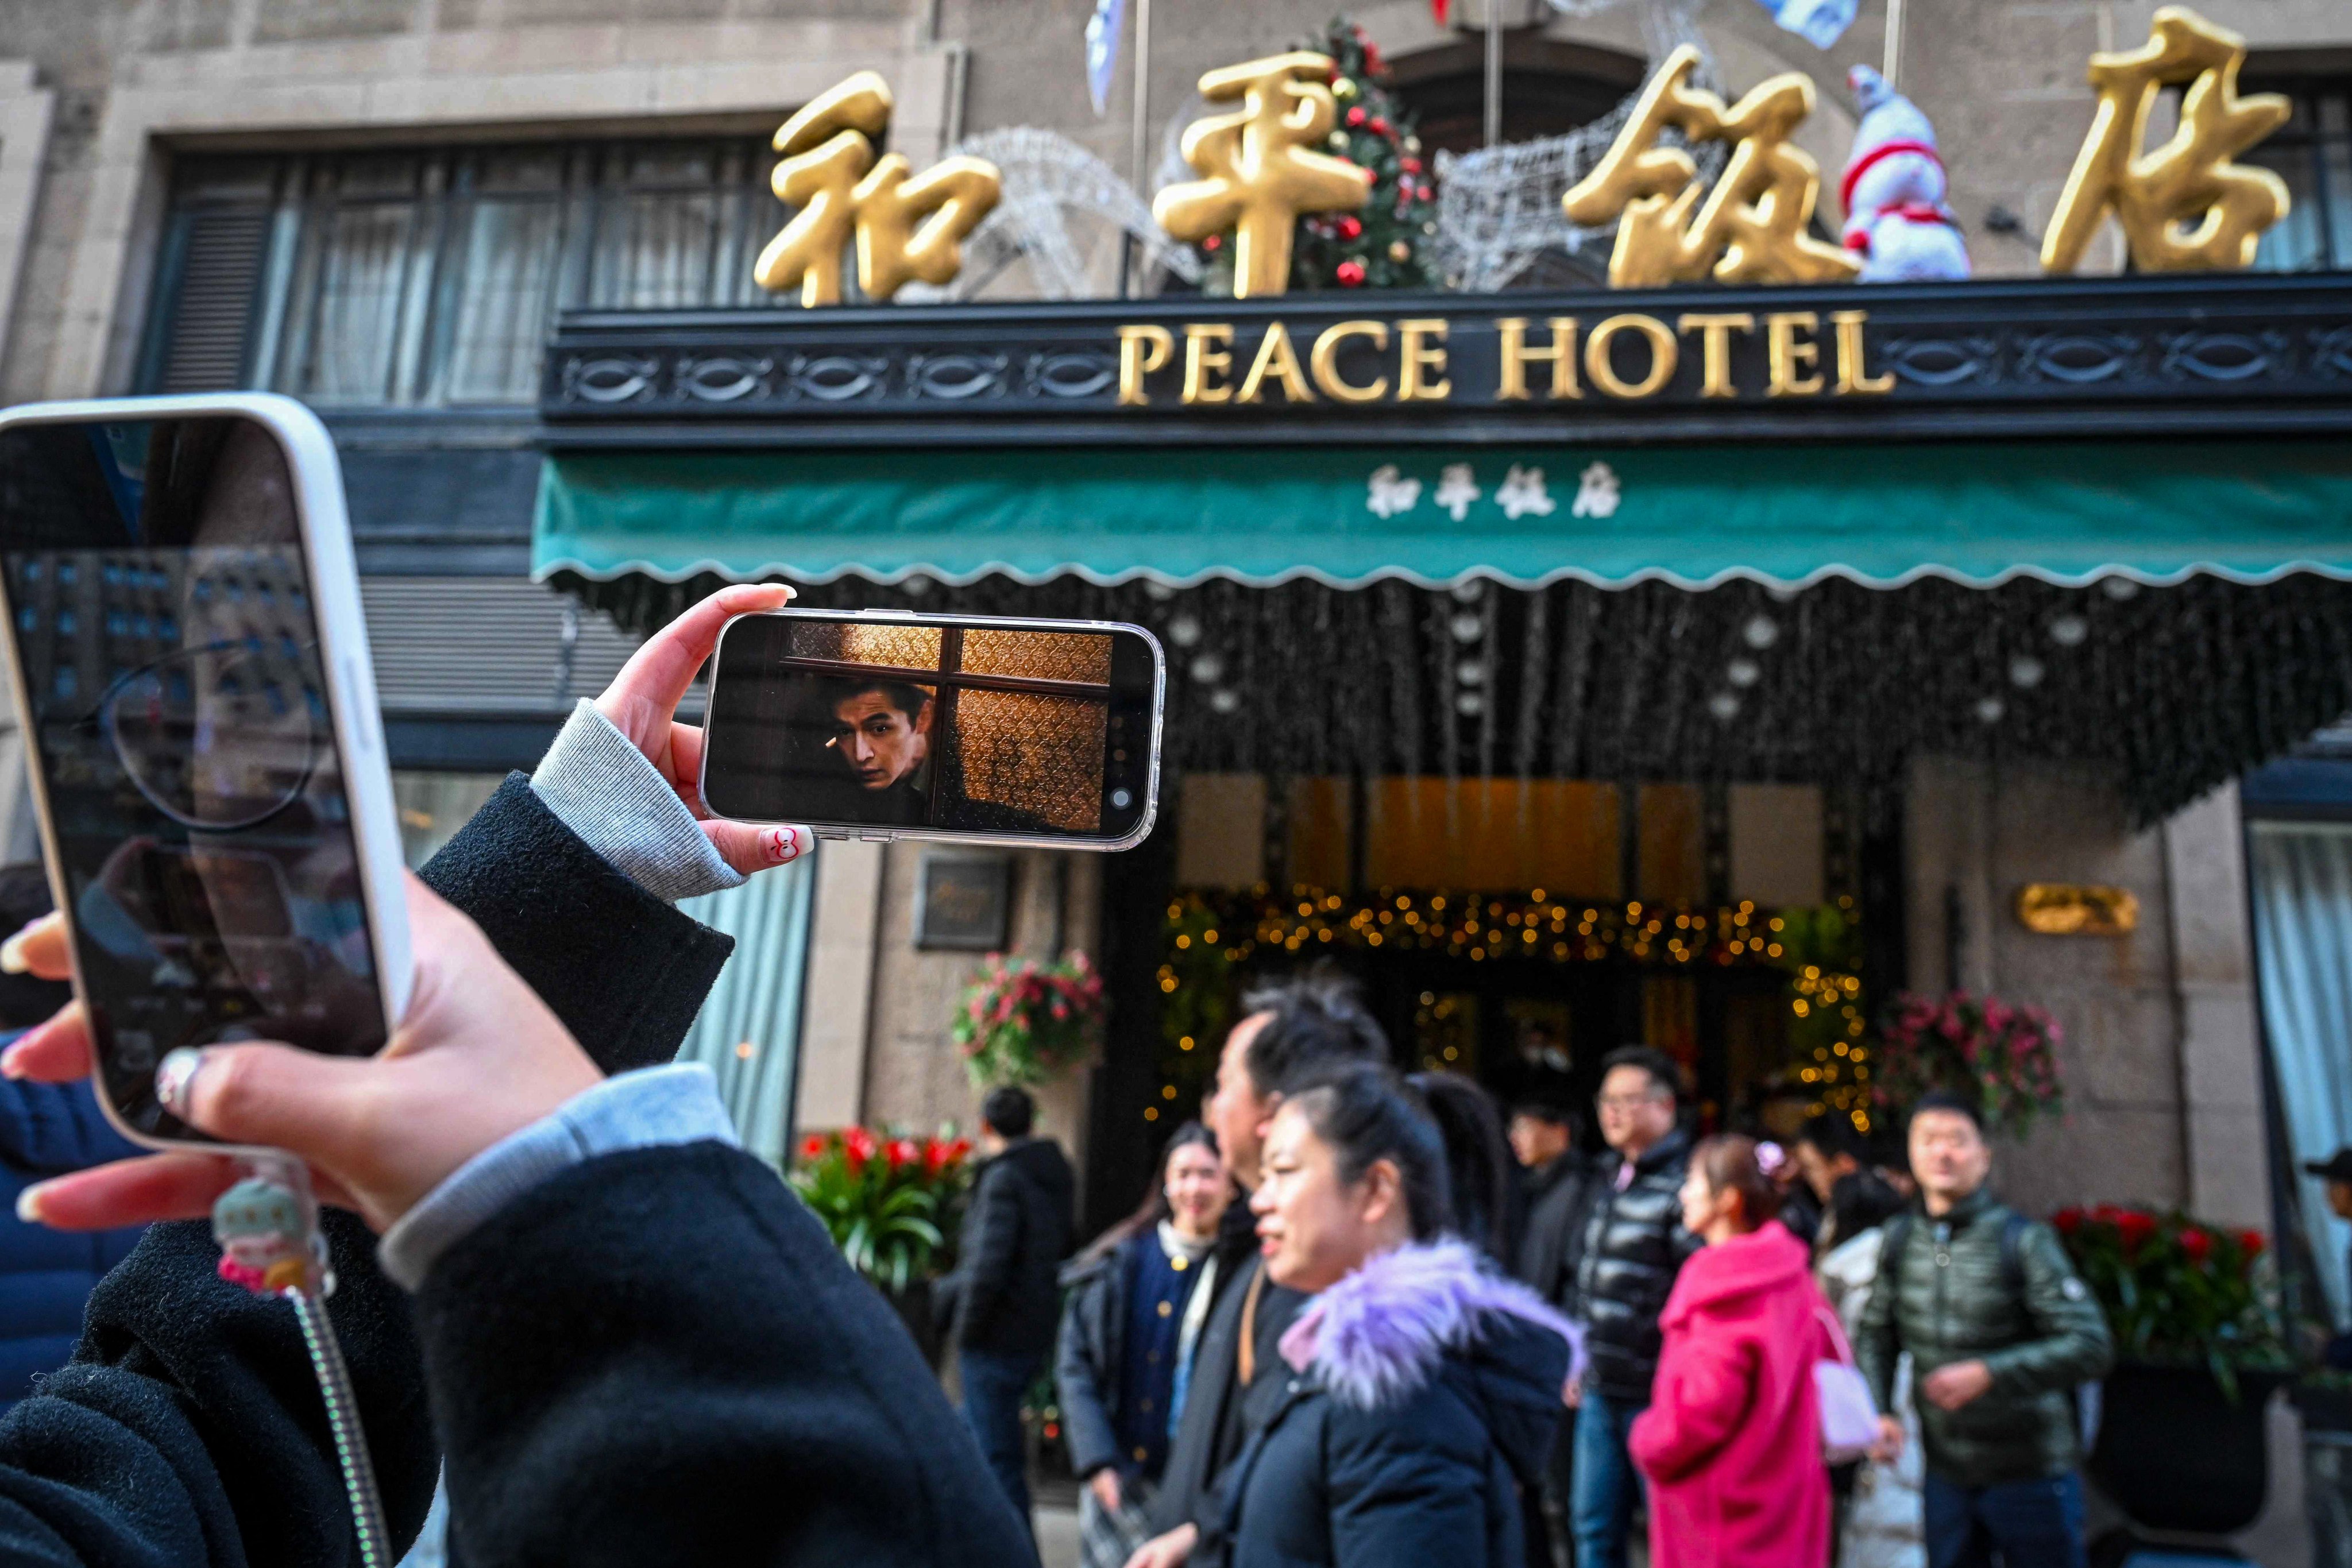 A new government joint notice says that authorities will exercise “guidance and supervision” for hotels to ensure that they can properly service foreign visitors. Photo: AFP